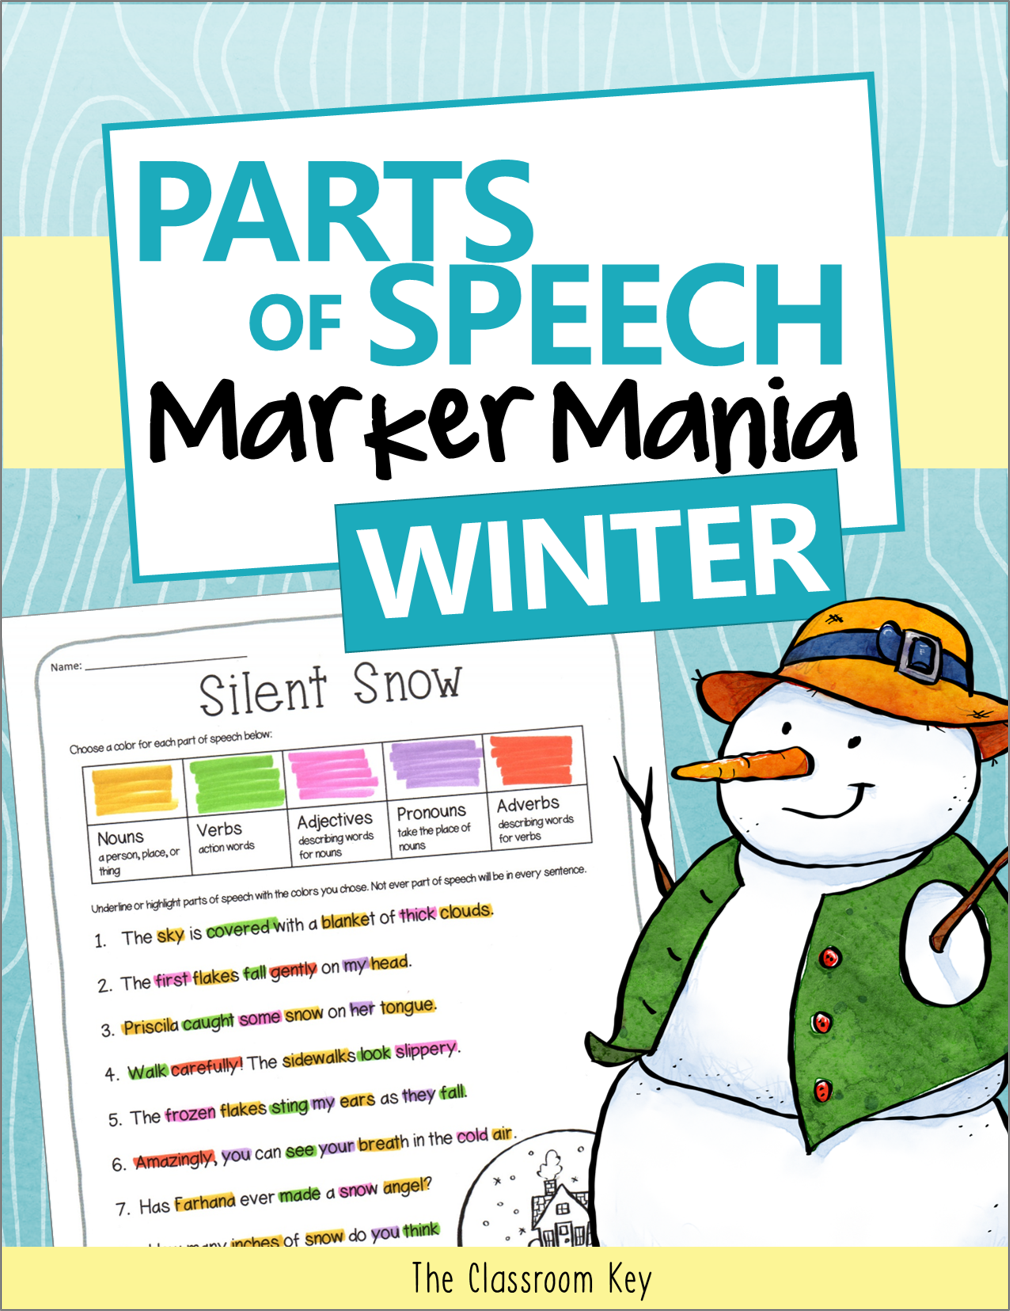 Teach parts of speech the easy way with these color coding activities for 2nd and 3rd graders. Themes include winter, Christmas, Hanukkah, and Valentine's Day